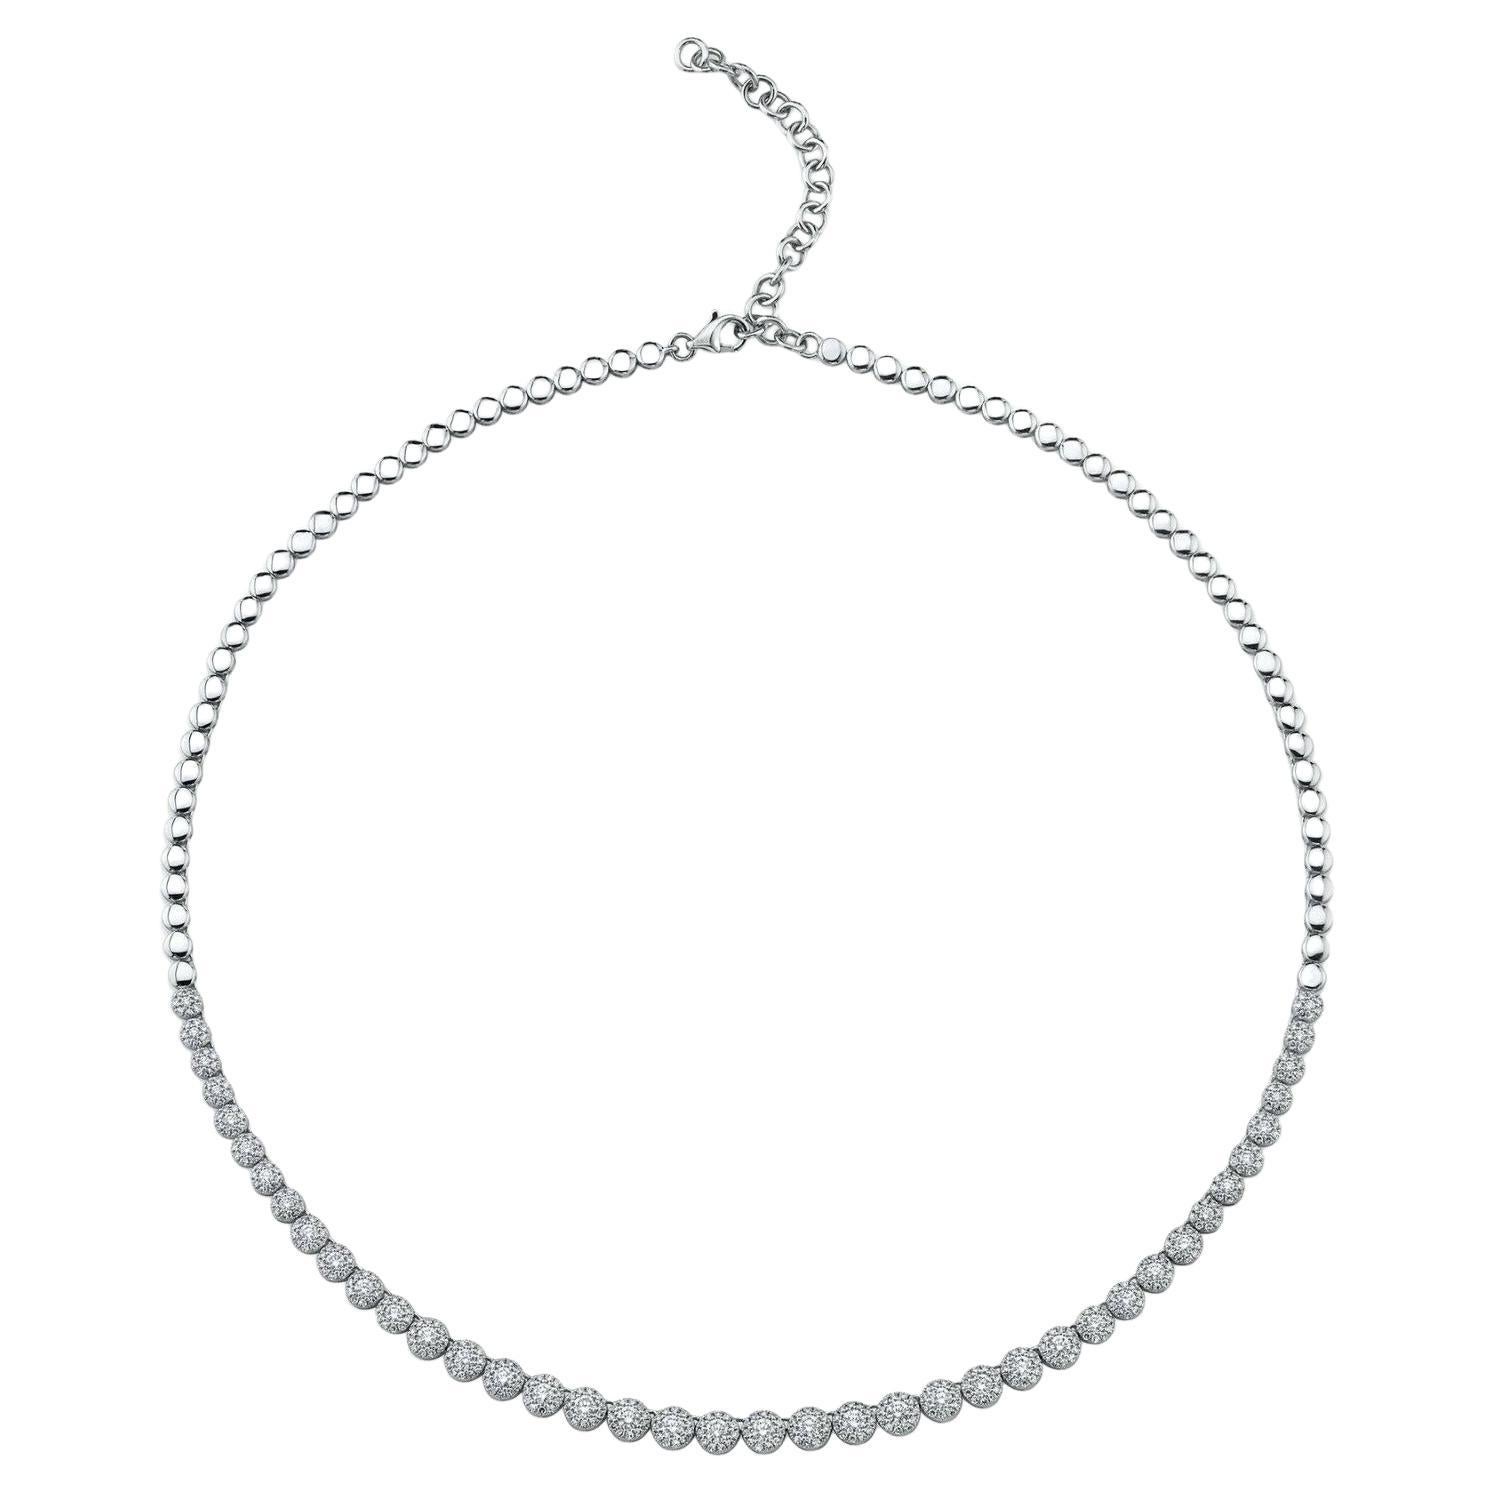 Halo Beaded 2.55 Carat Diamond White Gold Choker Tennis Necklace For Sale